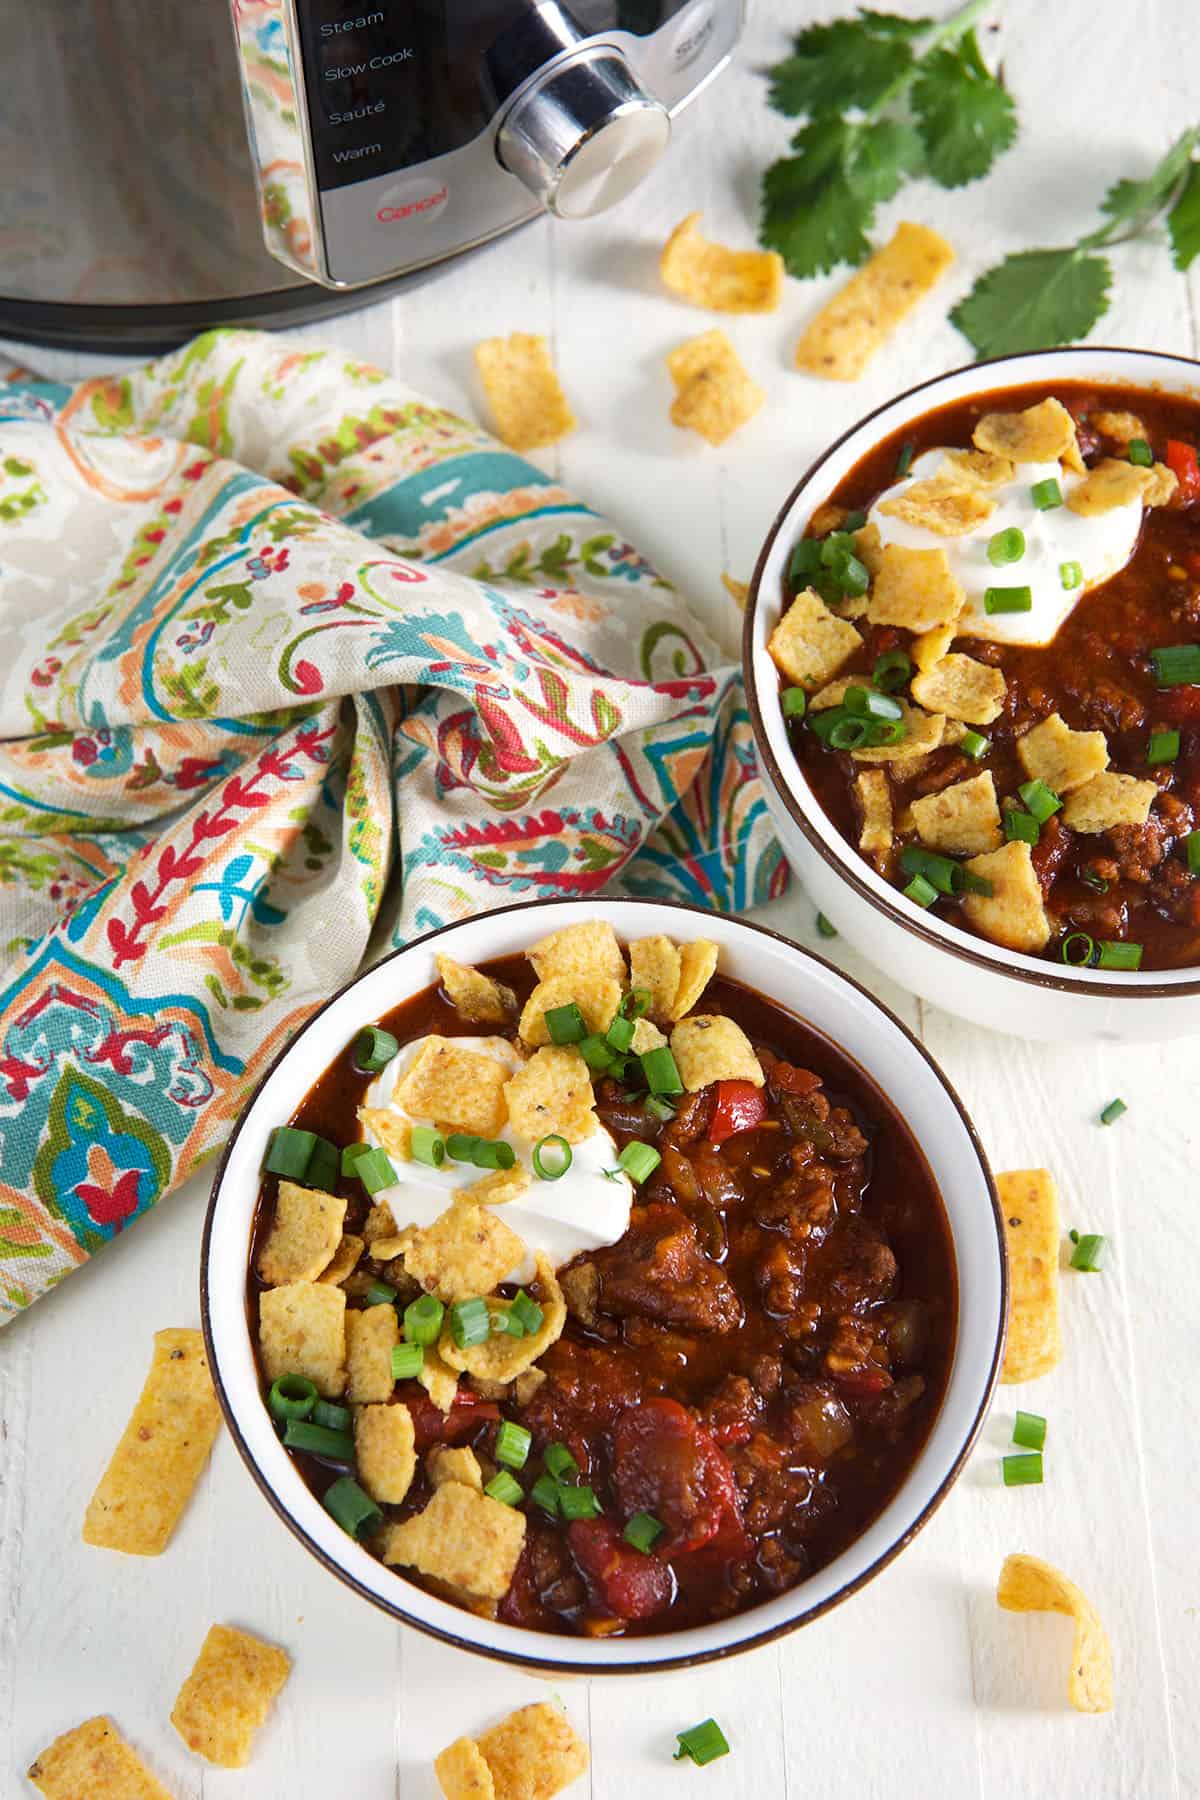 Two full, garnished bowls of chili are placed next to a tea towel and the Instant Pot.